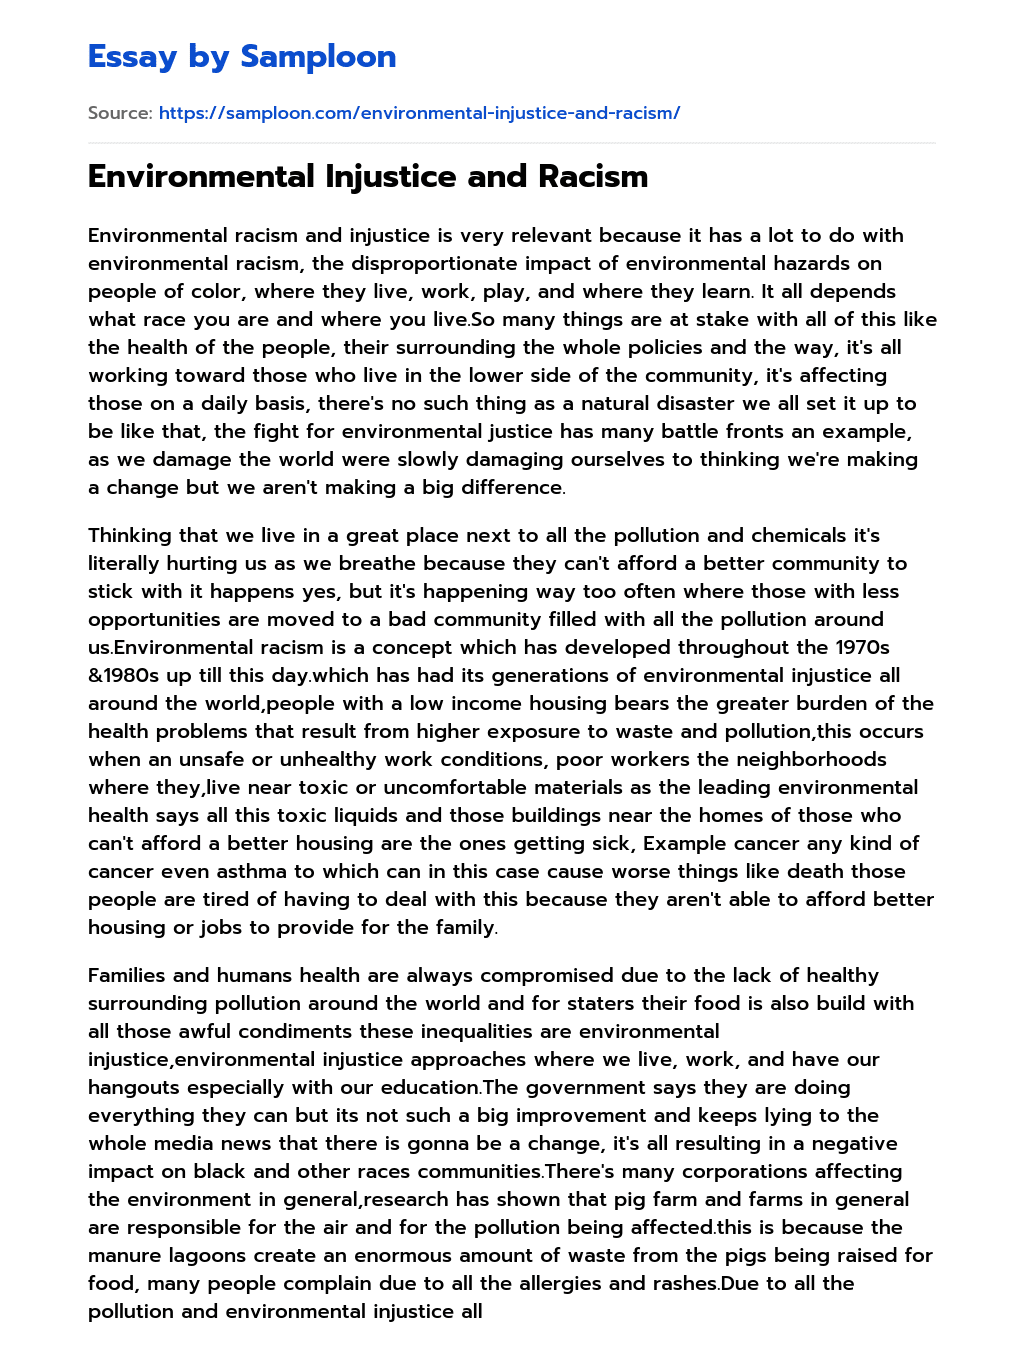 Environmental Injustice and Racism essay